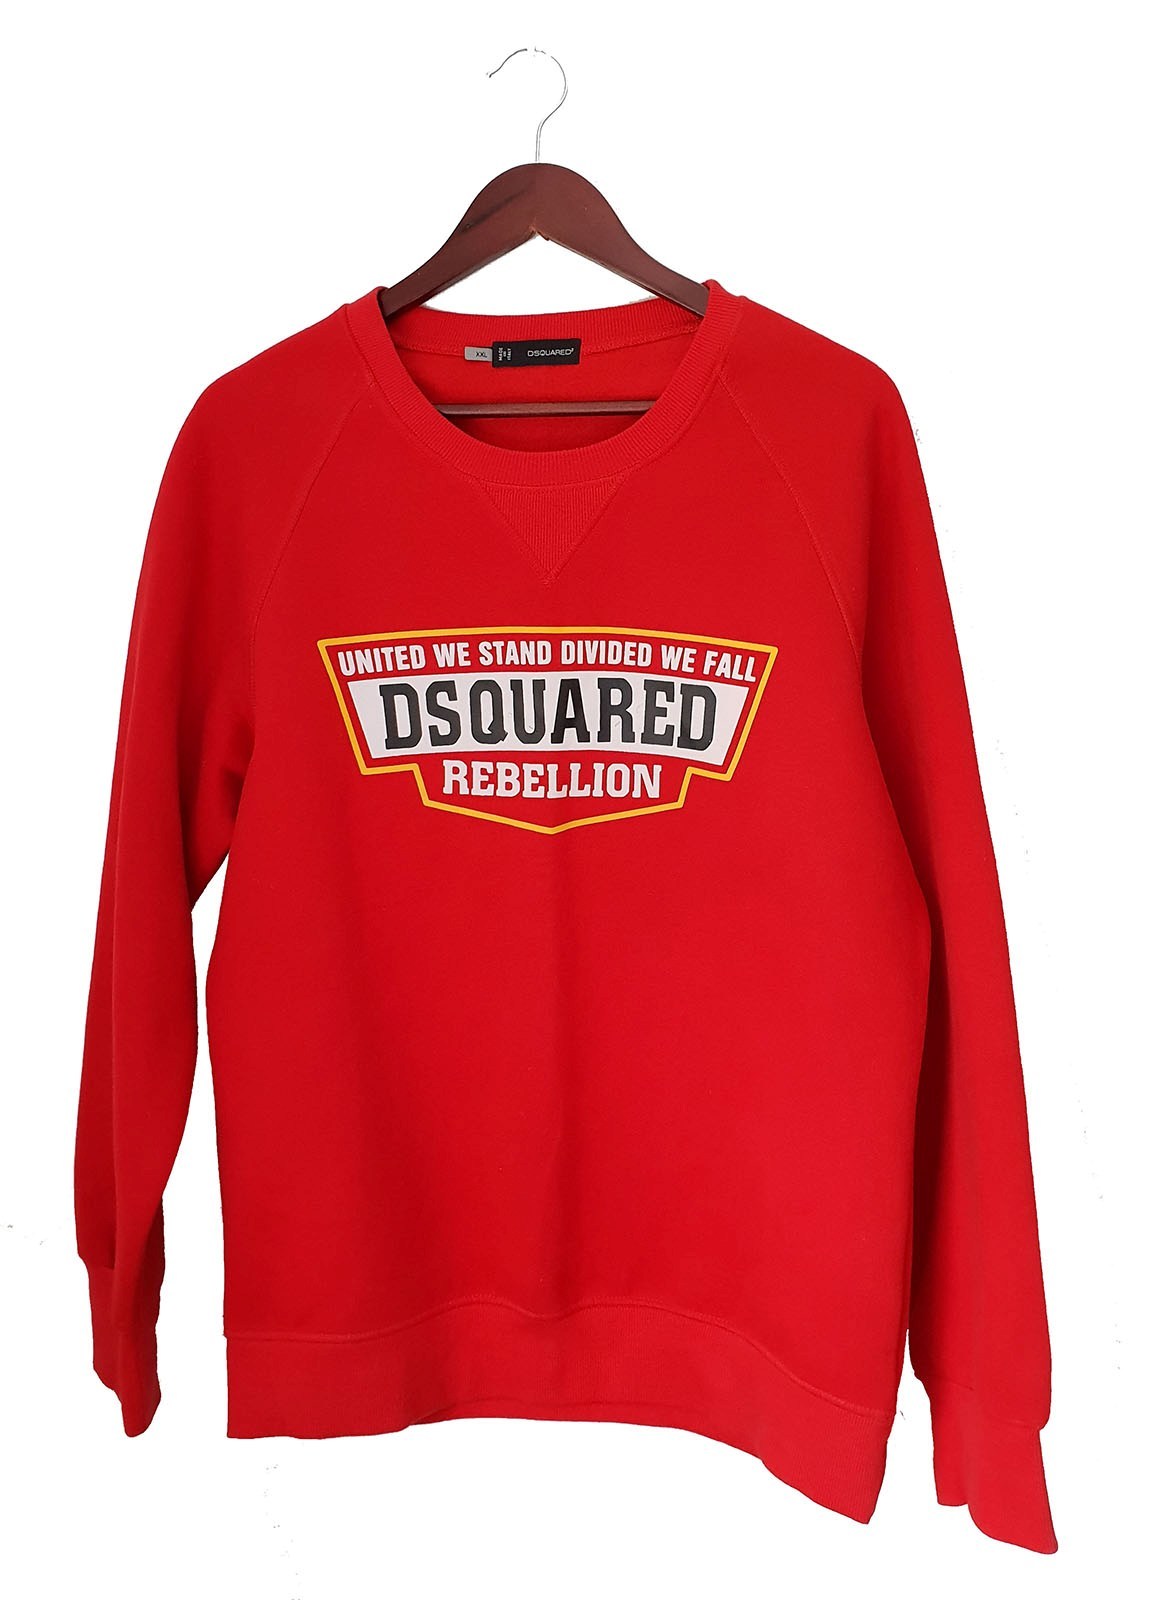 DSQUARED 2 MEN'S LUXURY UNITED WE STAND VIBRANT RED CREW JUMPER FITS L ...